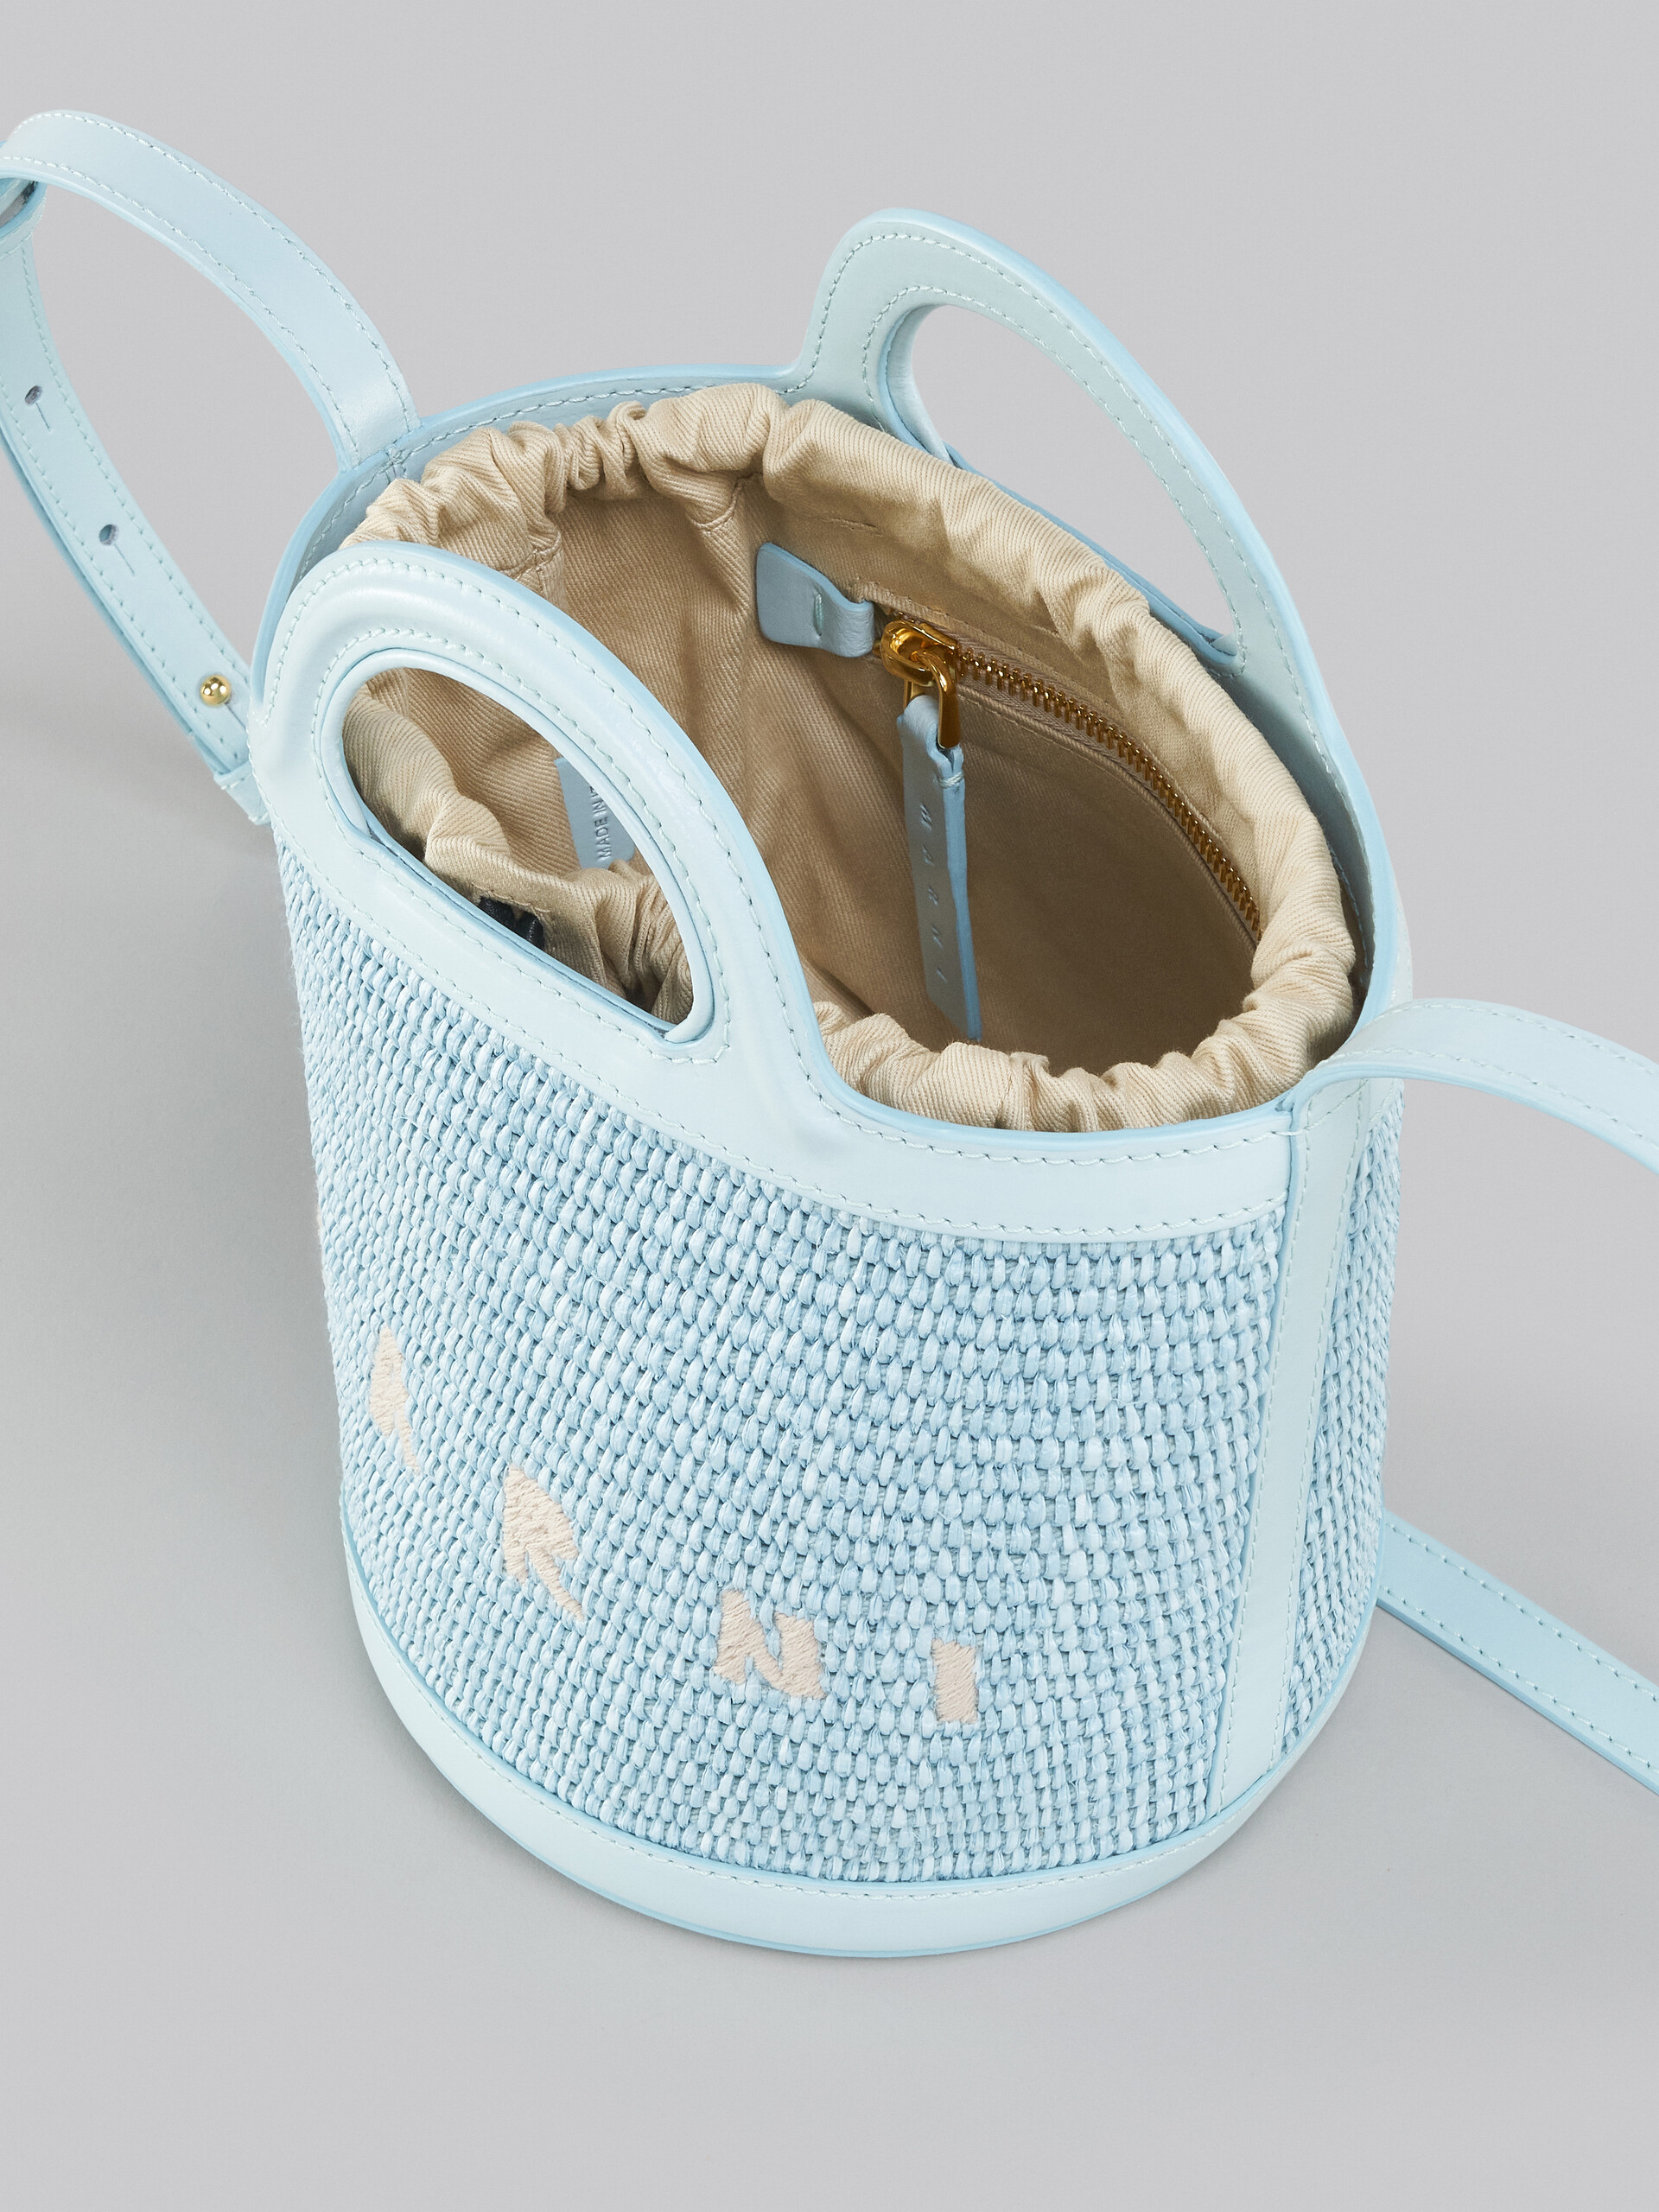 Tropicalia Small Bucket Bag in light blue leather and raffia - Shoulder Bags - Image 4